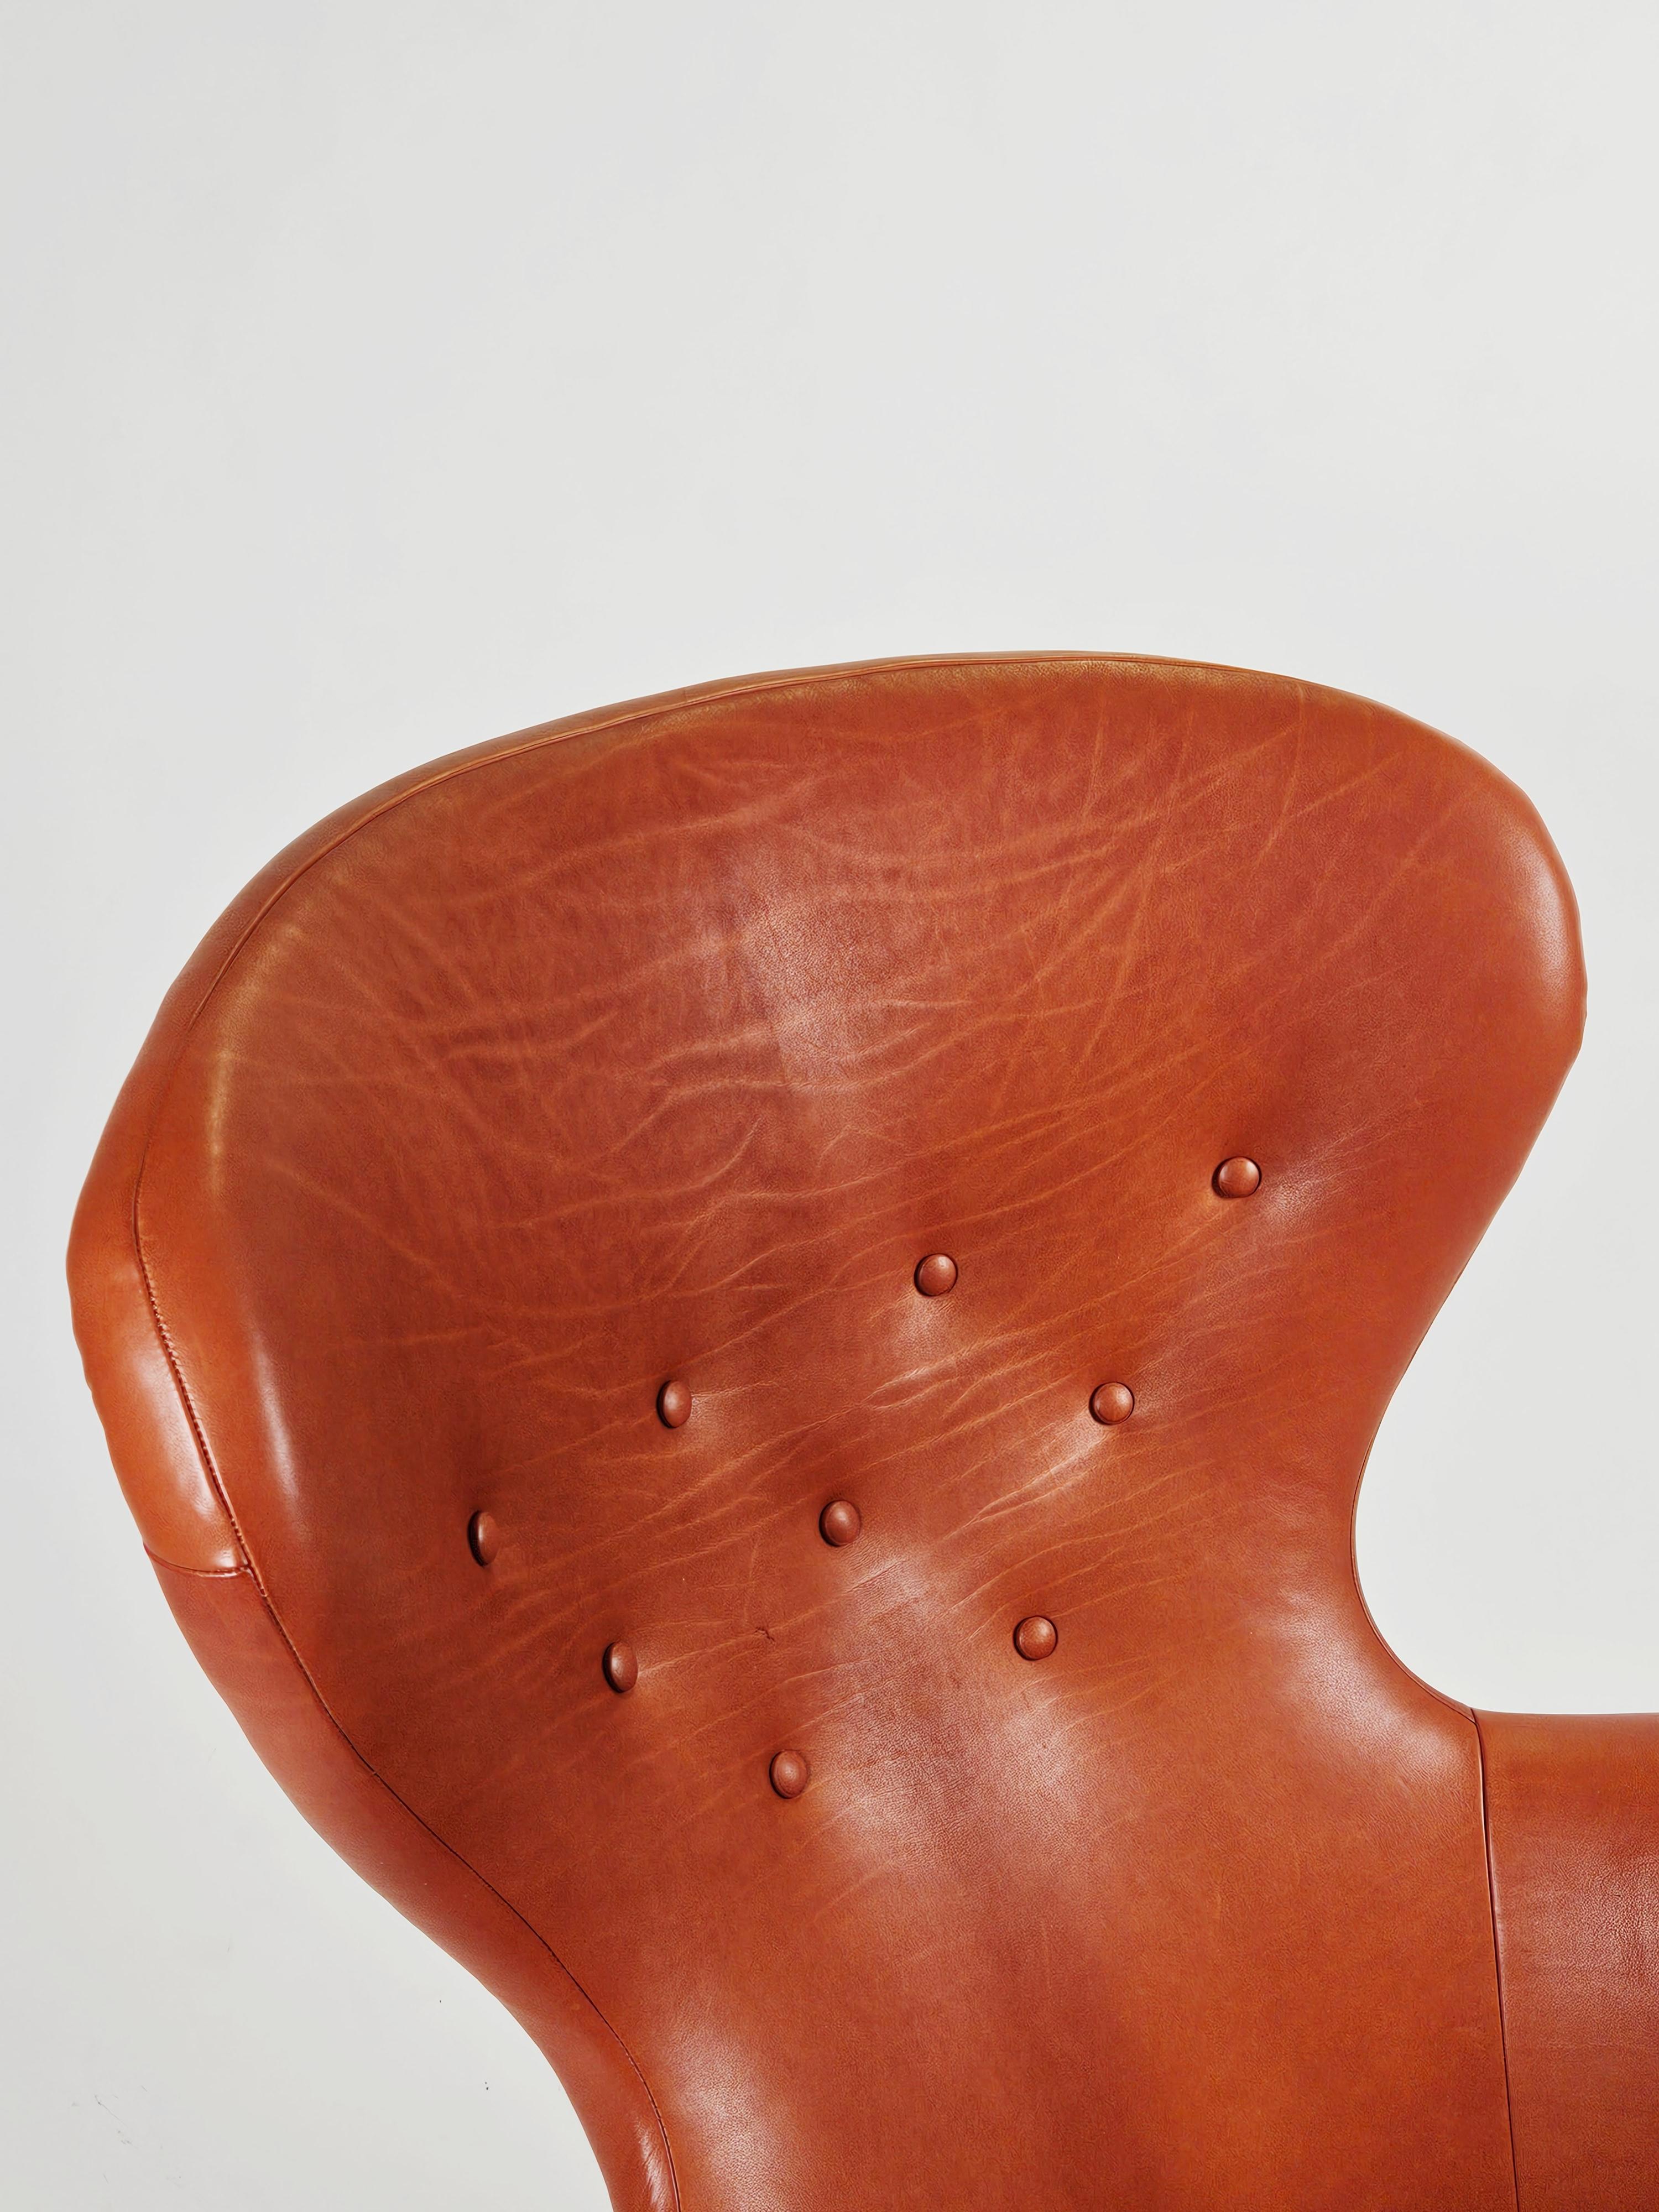 Rare Scandinavian lounge chair 'Siesta' by Gustaf Hiort af Ornäs, Finland, 1950s For Sale 1